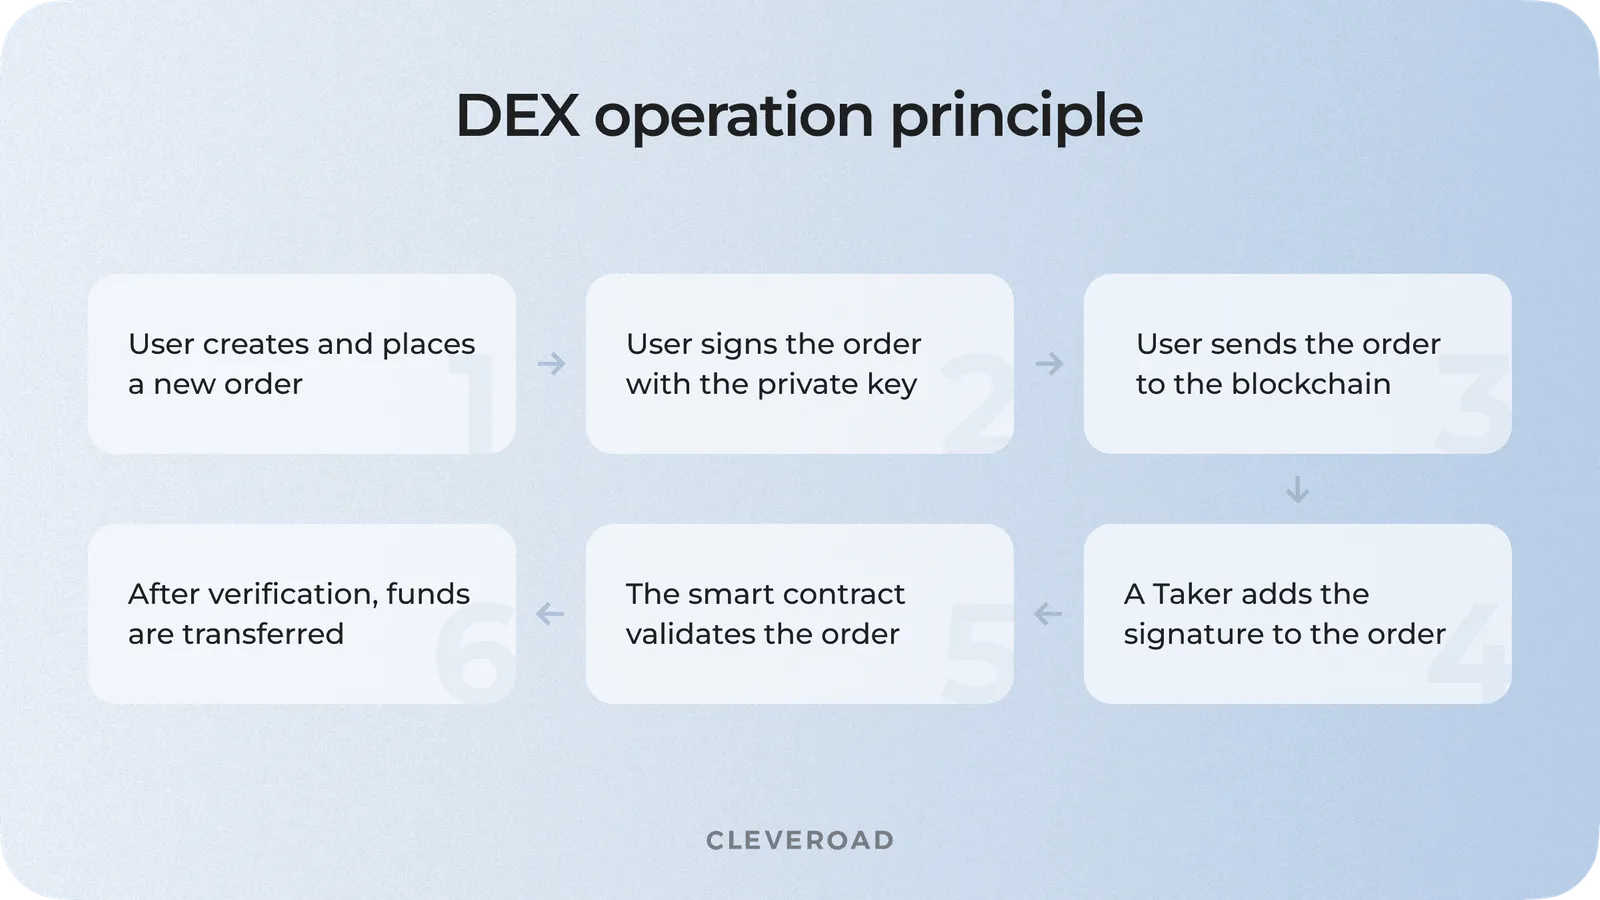 How DEX works for users: the core performance principle